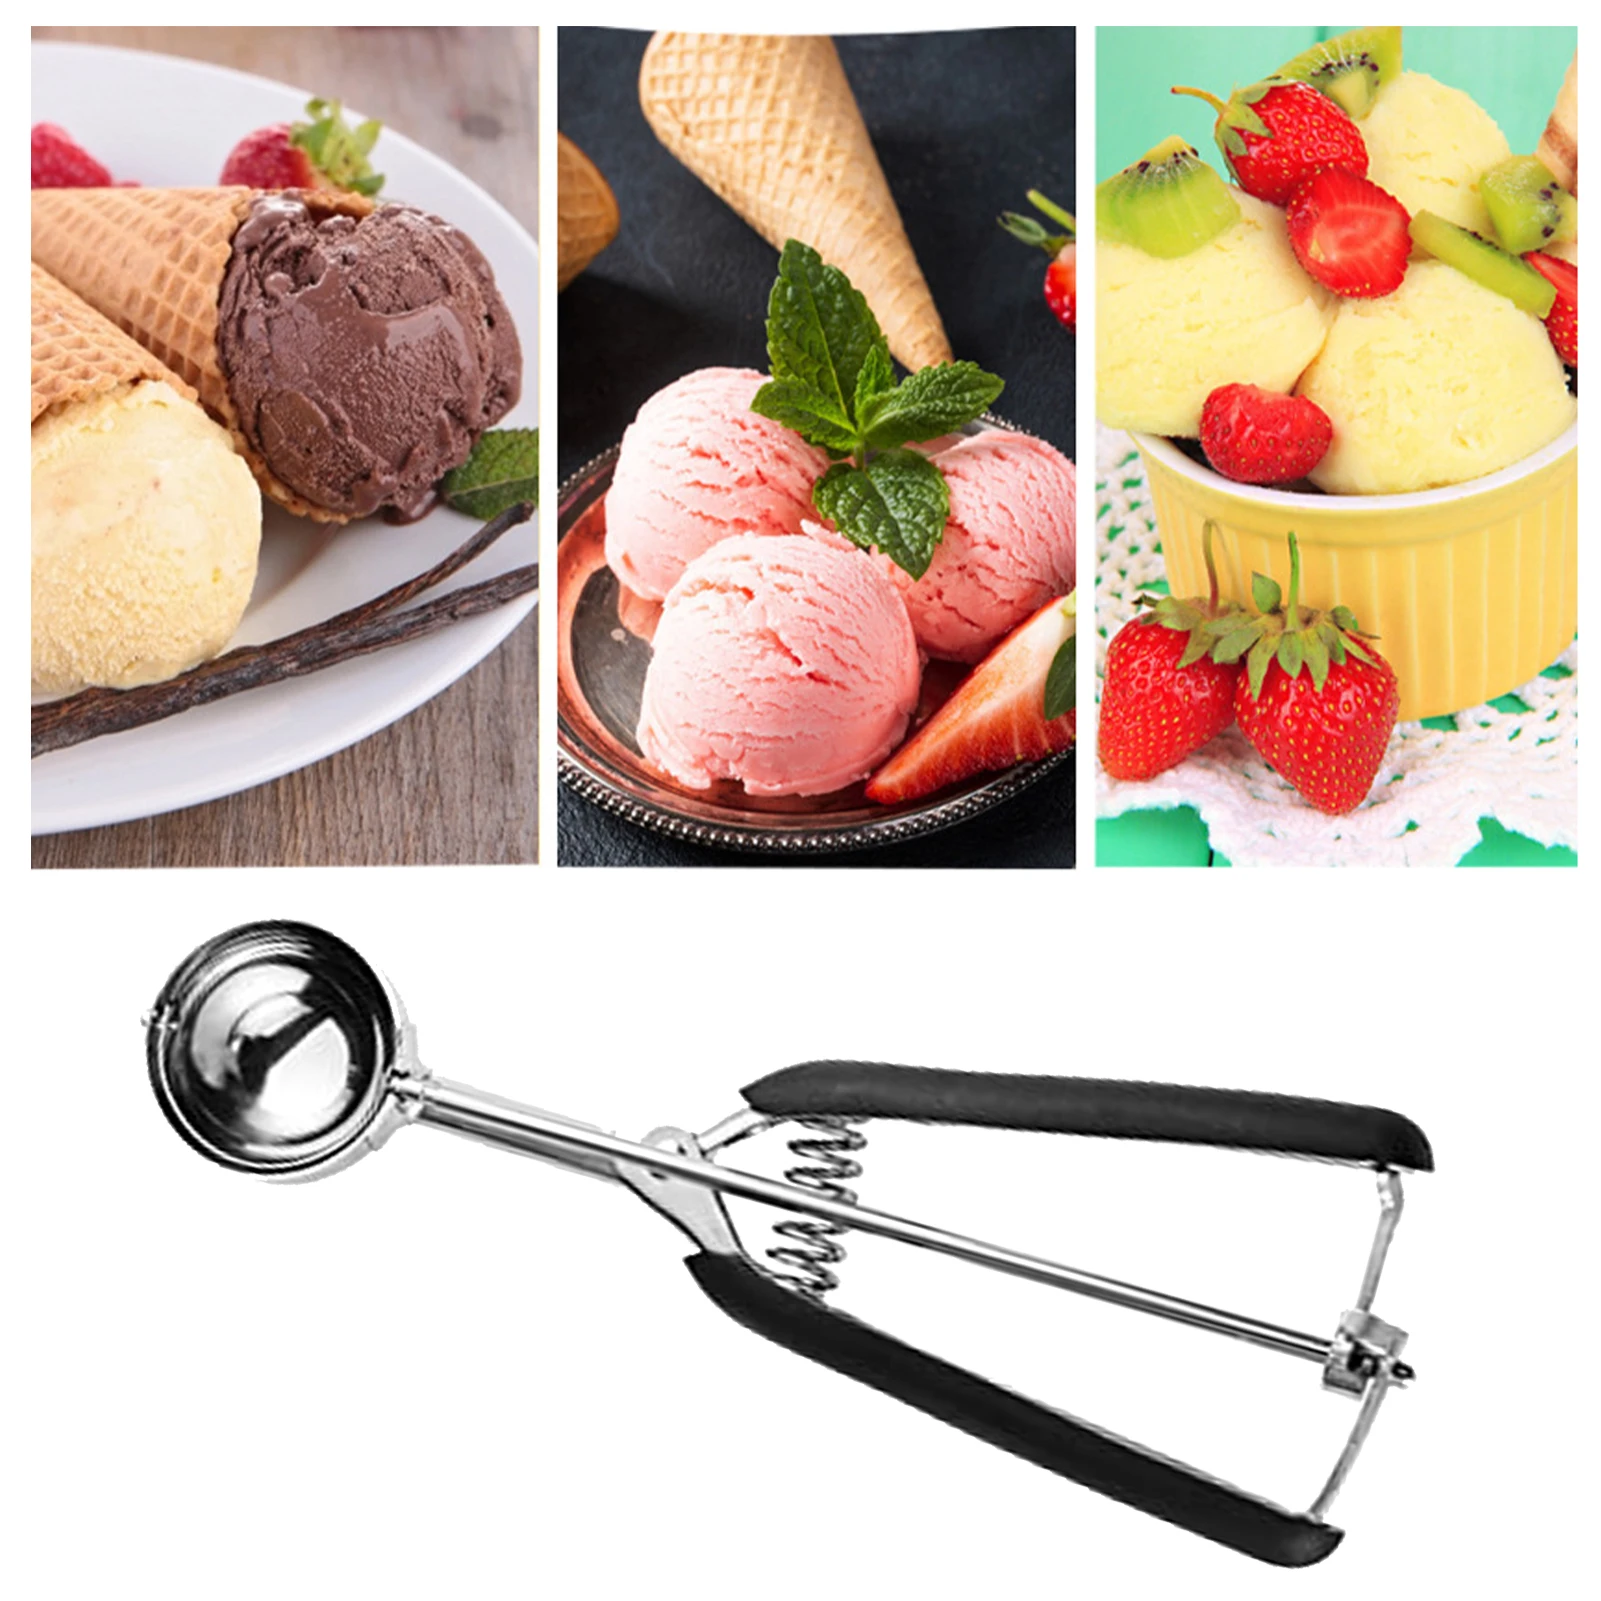 Extra Small Cookie Scoop 1 tsp, Professional Stainless Steel Mini Ice Cream  Scoop 25 mm, Melon Baller Scoop Good Soft Grips, Quick Trigger Release